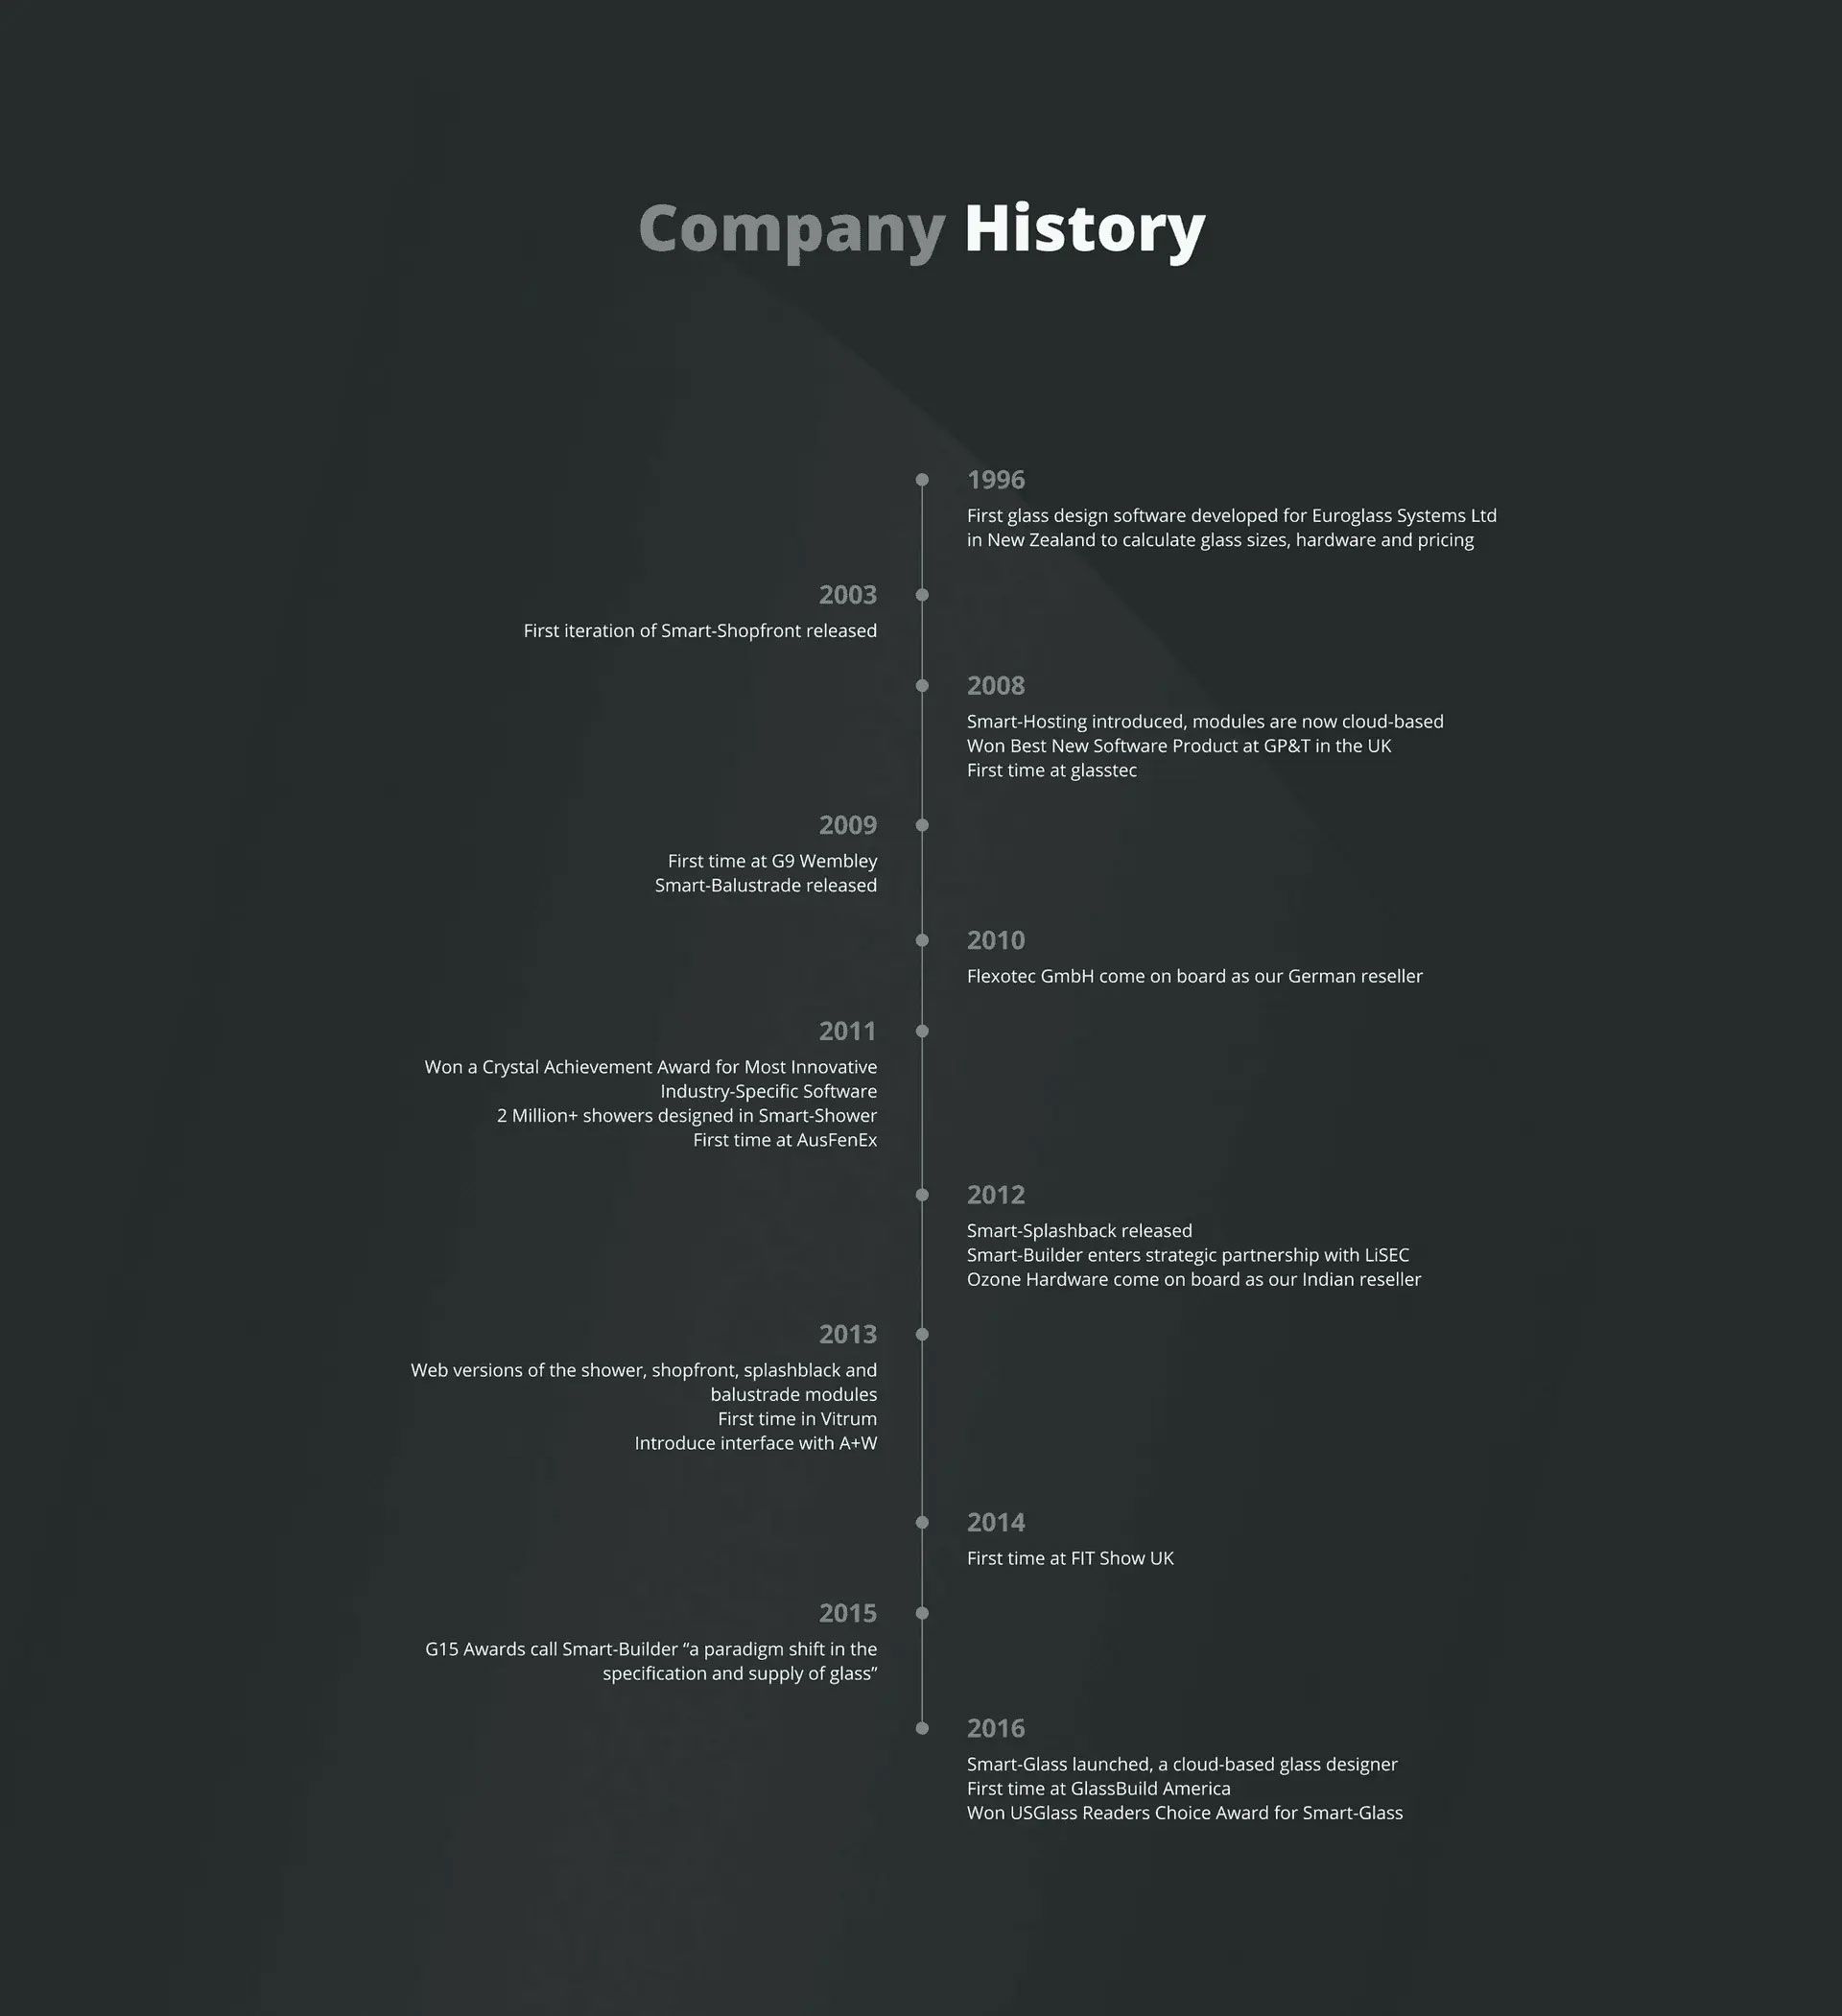 Smart Builder Company History - making great glass software for over 20 years